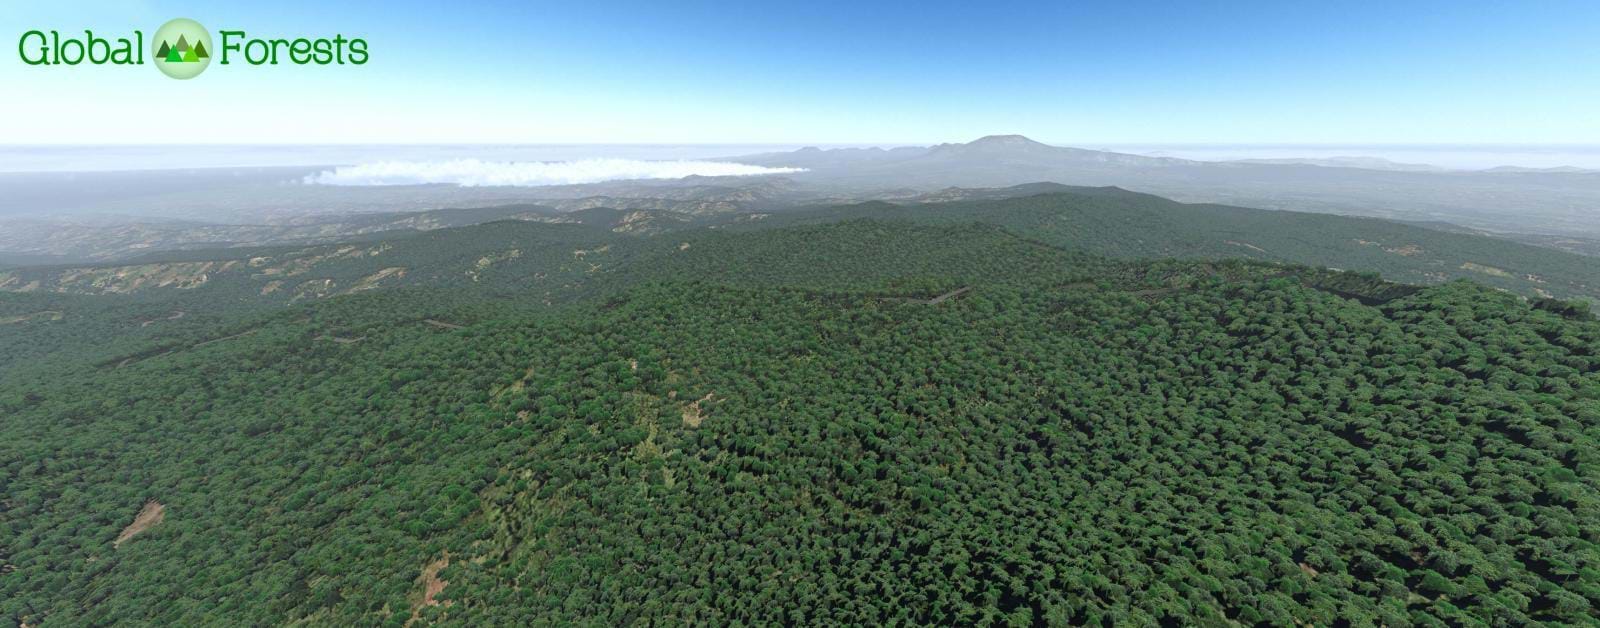 GeoReality Global Forests Vol. 2 North America for X-Plane